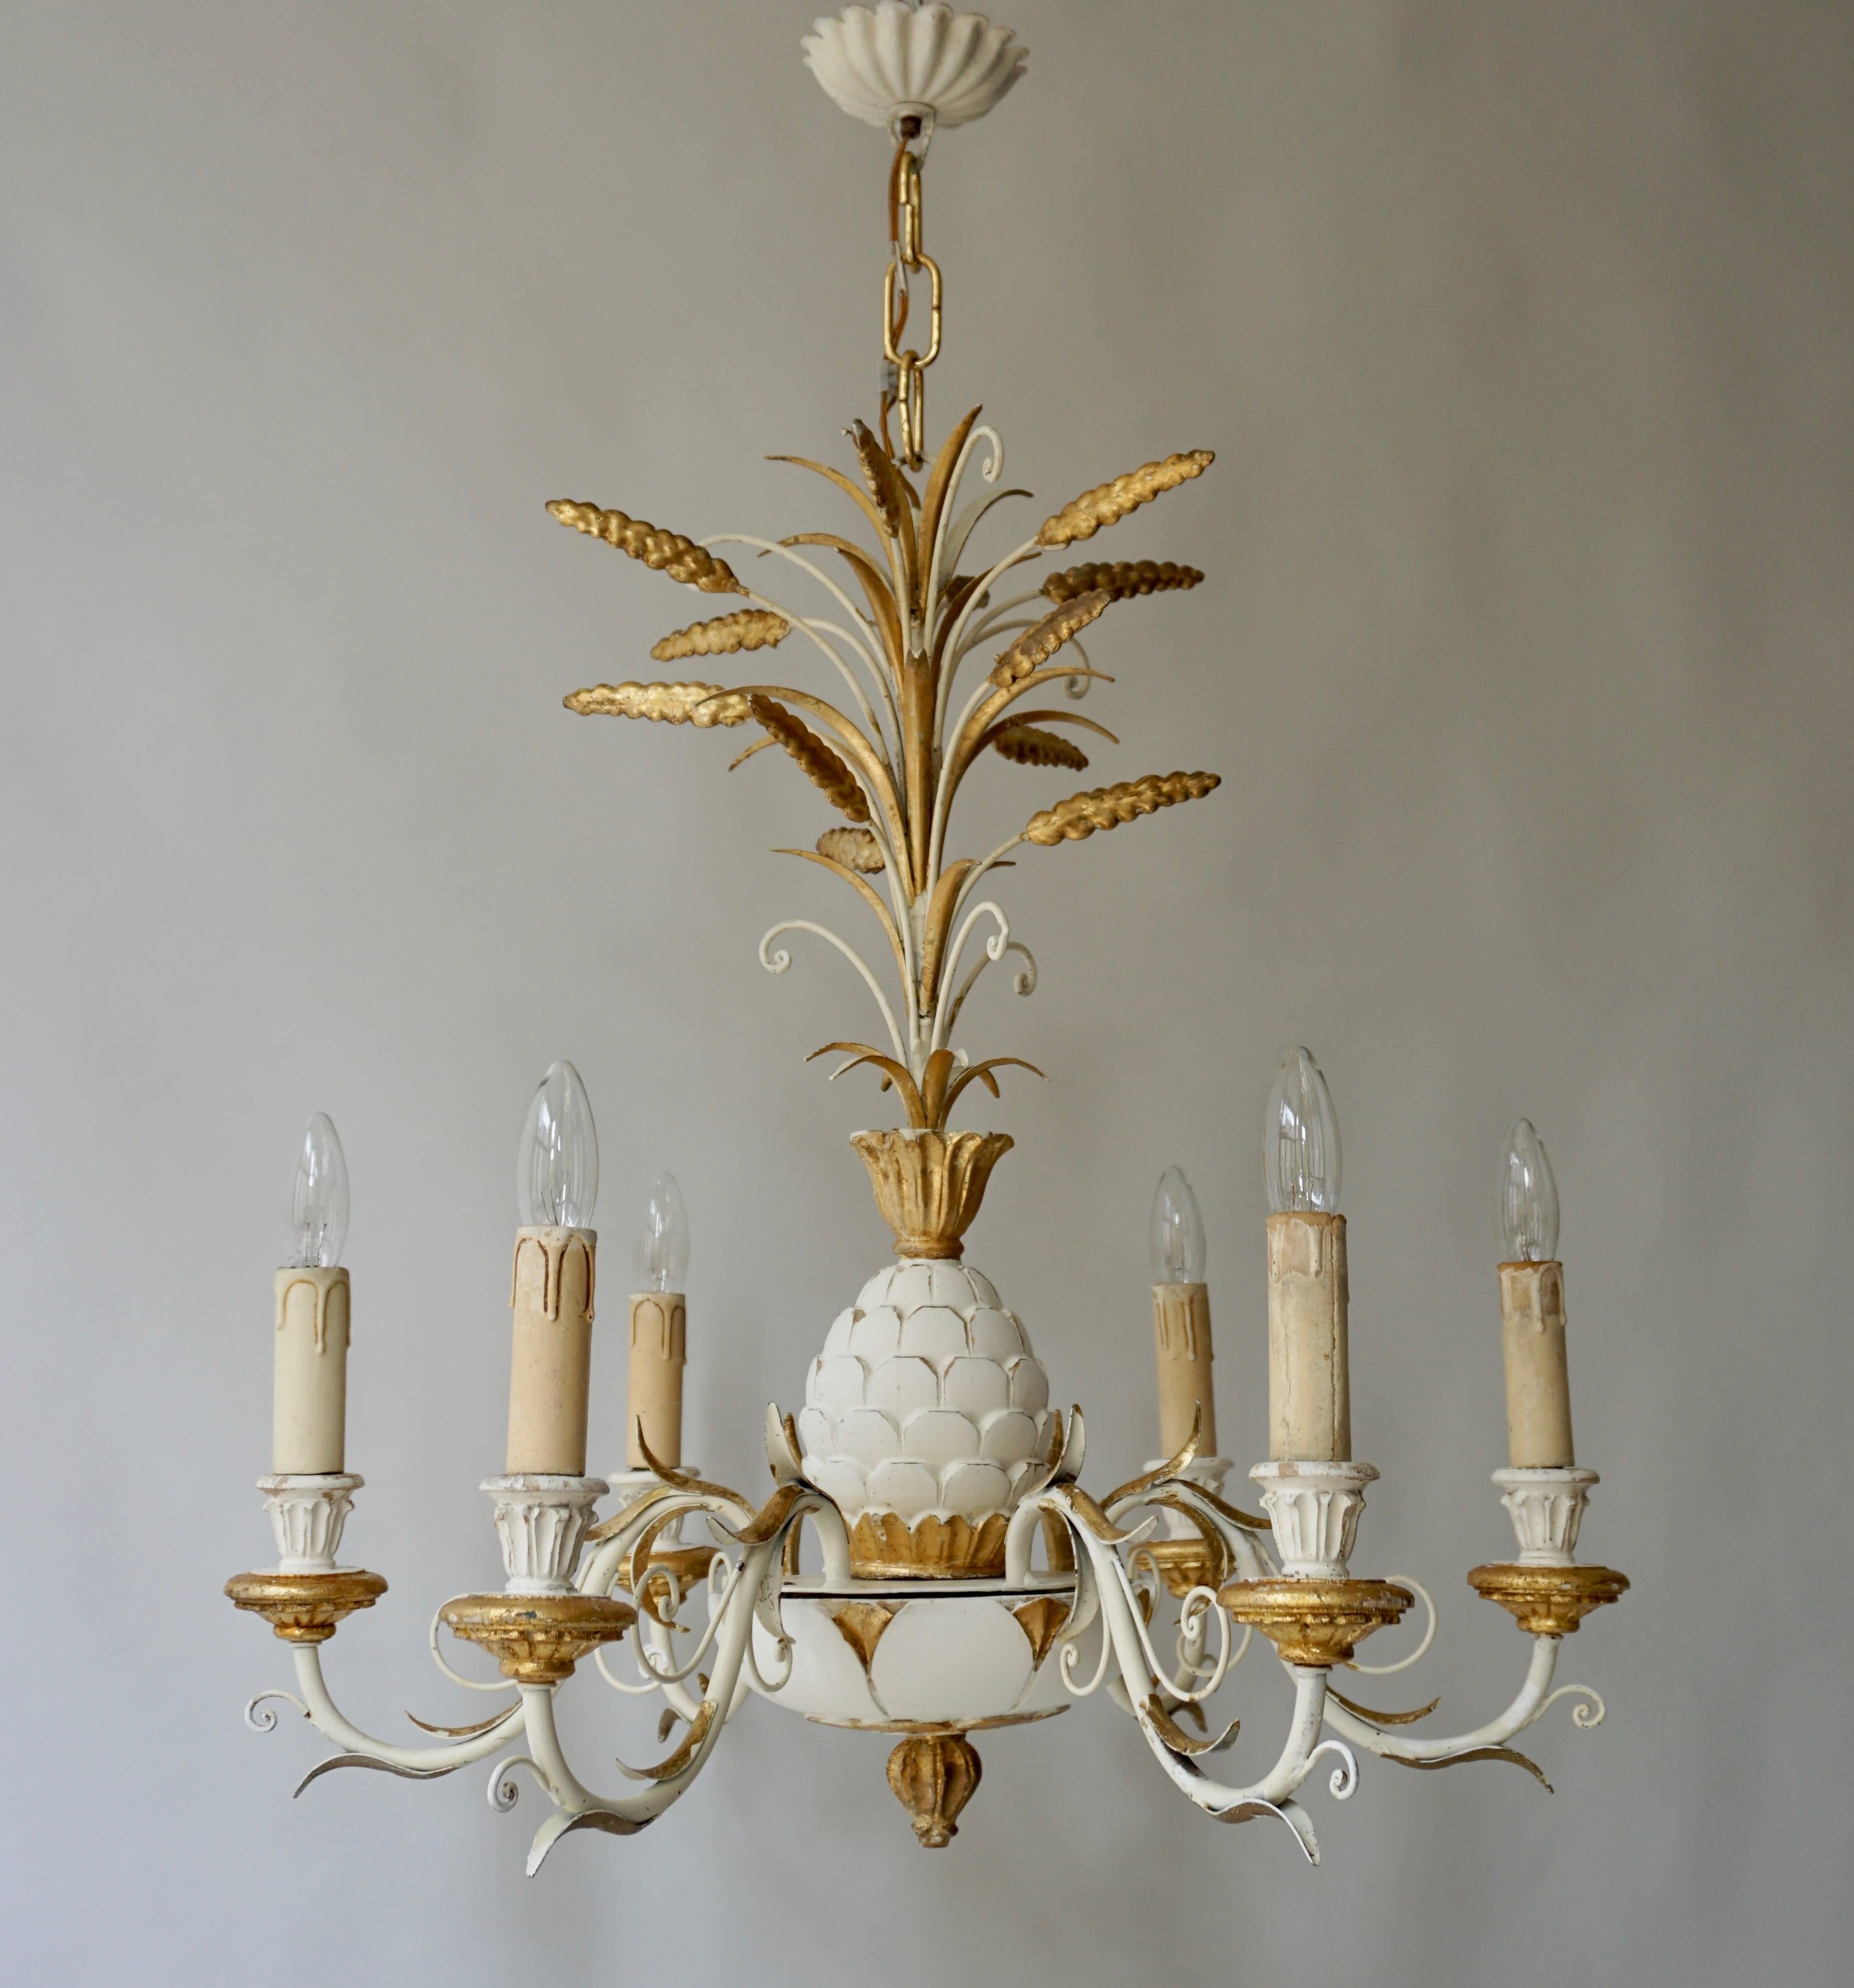 Remarkably vintage carvings, gold gilt and white pineapple decorated Italian chandelier ornament.
Article contains six E14 lights, scrolling iron arms with arrow marks, gold leaf and elegant classic shape.
Measures: Diameter 62 cm.
Height fixture 64